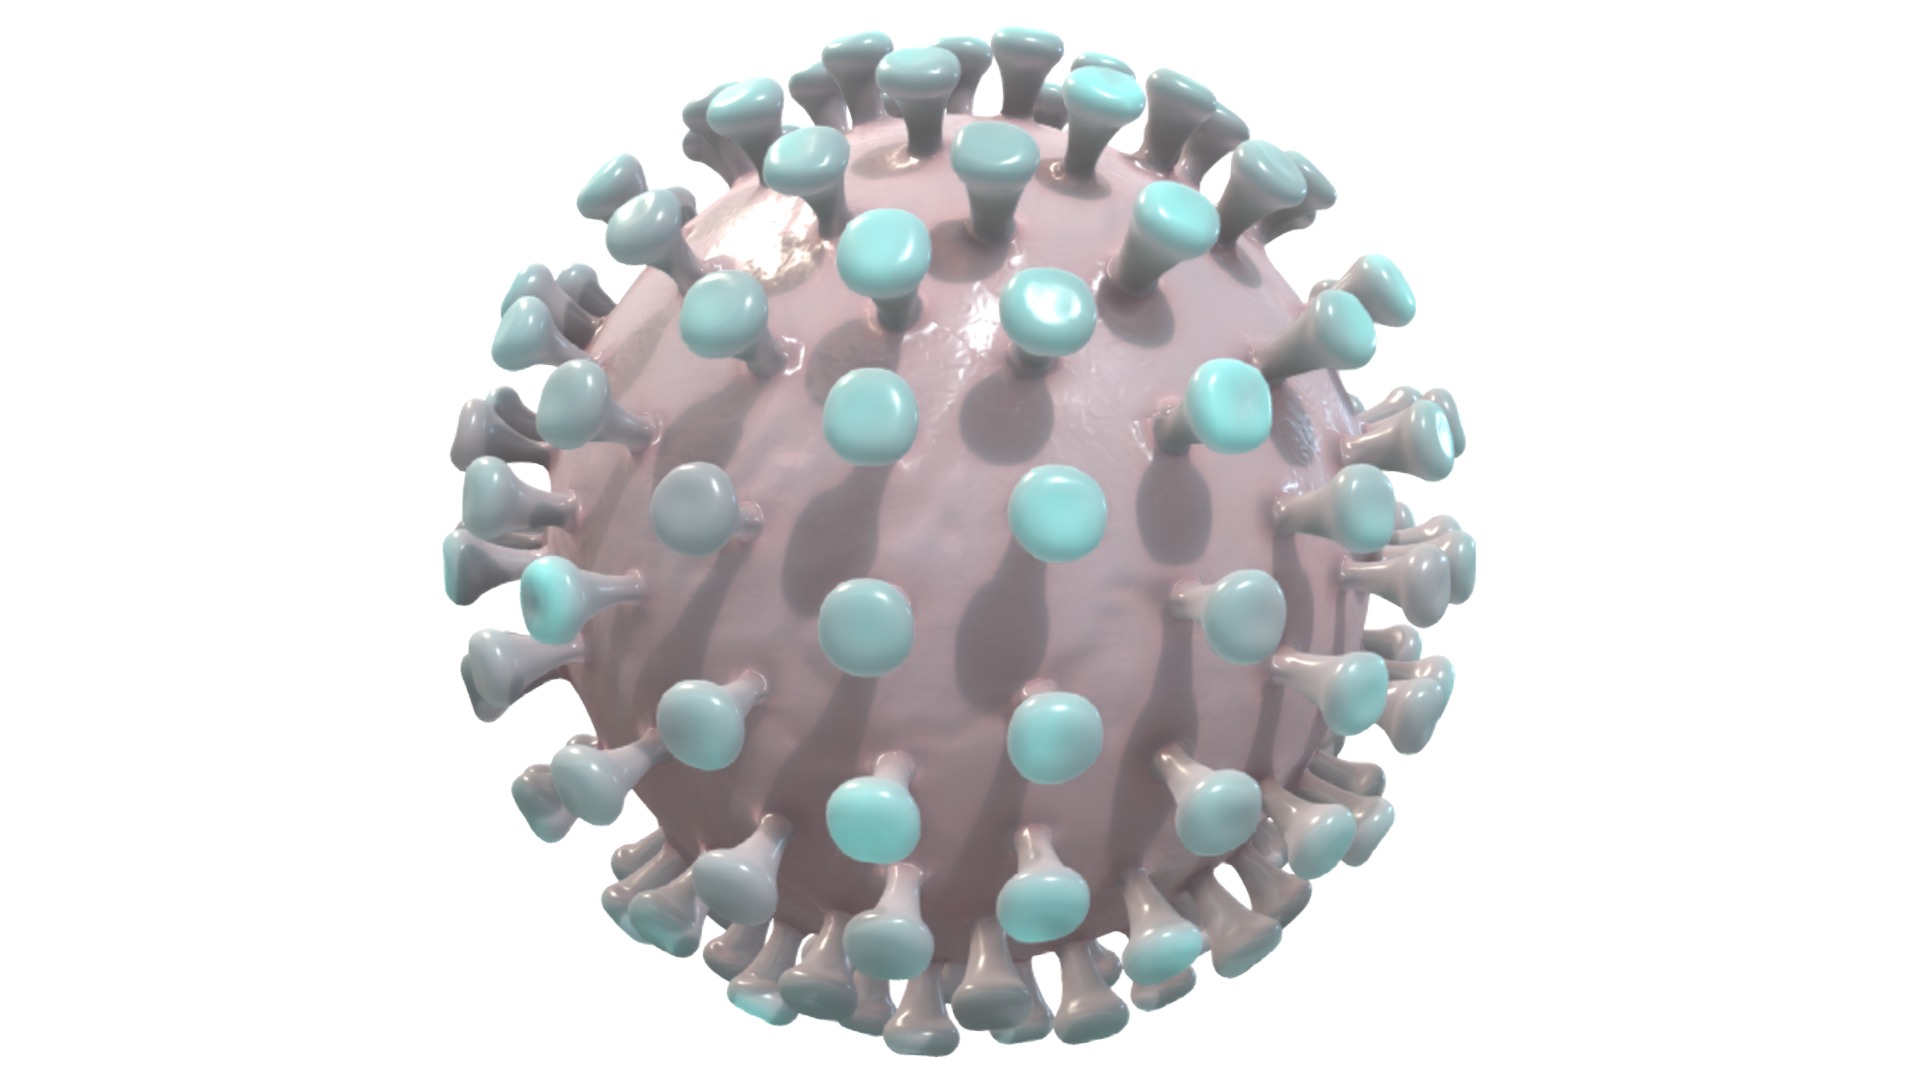 3D model Coronavirus nCoV - This is a 3D model of the Coronavirus nCoV. The 3D model is about a group of colorful beads.